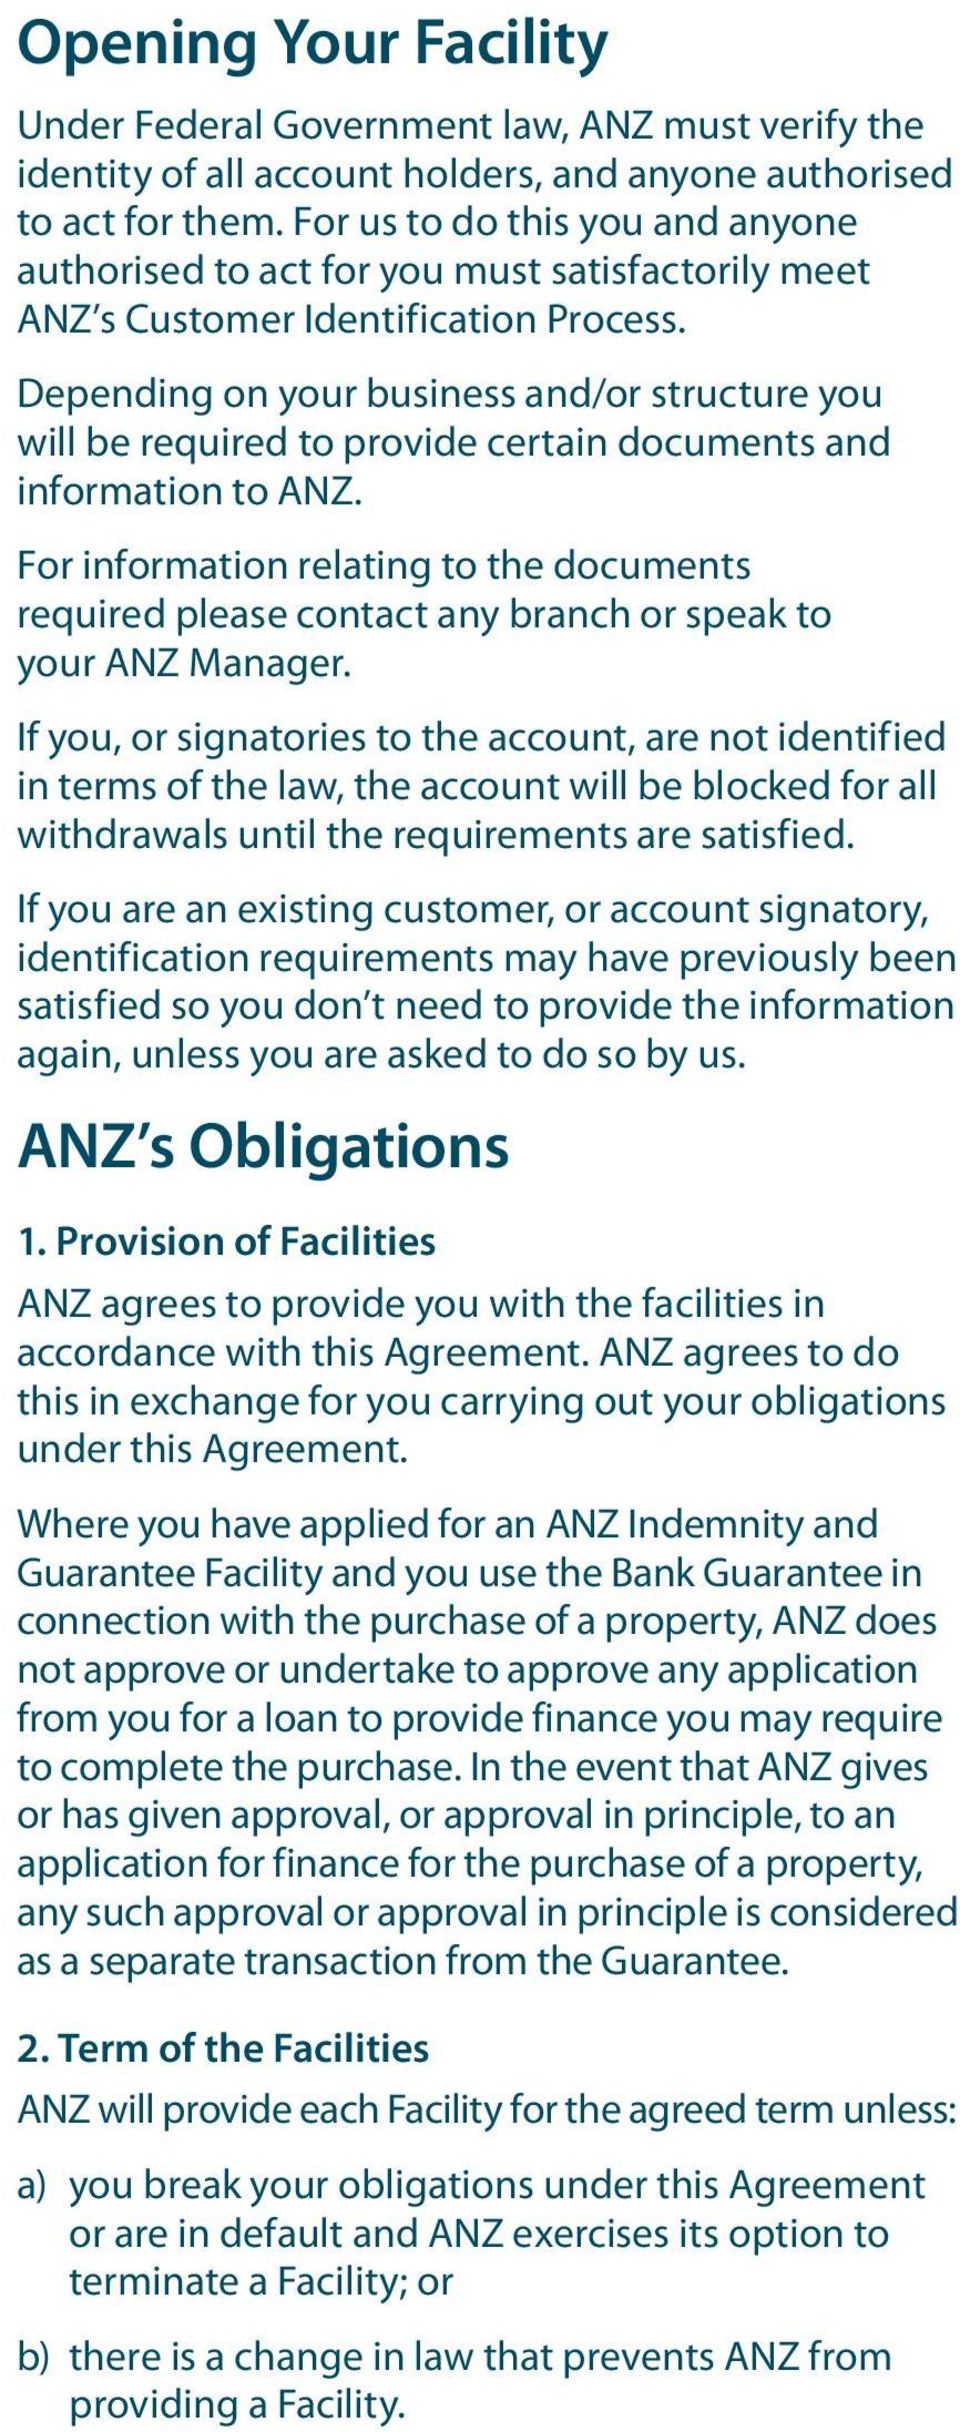 Depending on your business and/or structure you will be required to provide certain documents and information to ANZ.